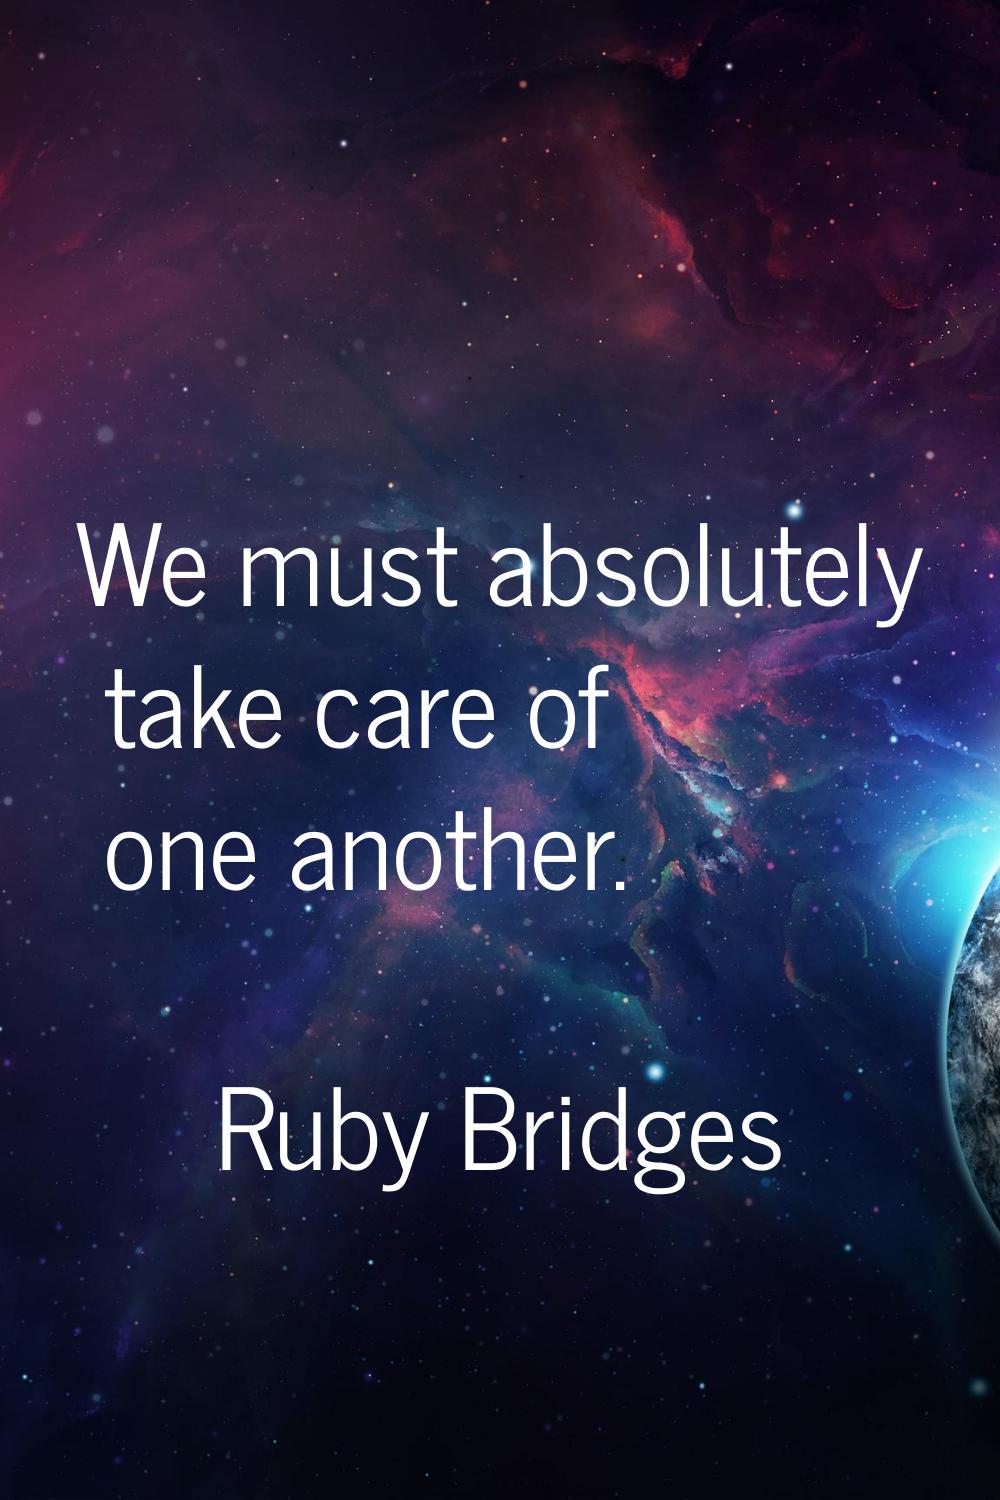 We must absolutely take care of one another.